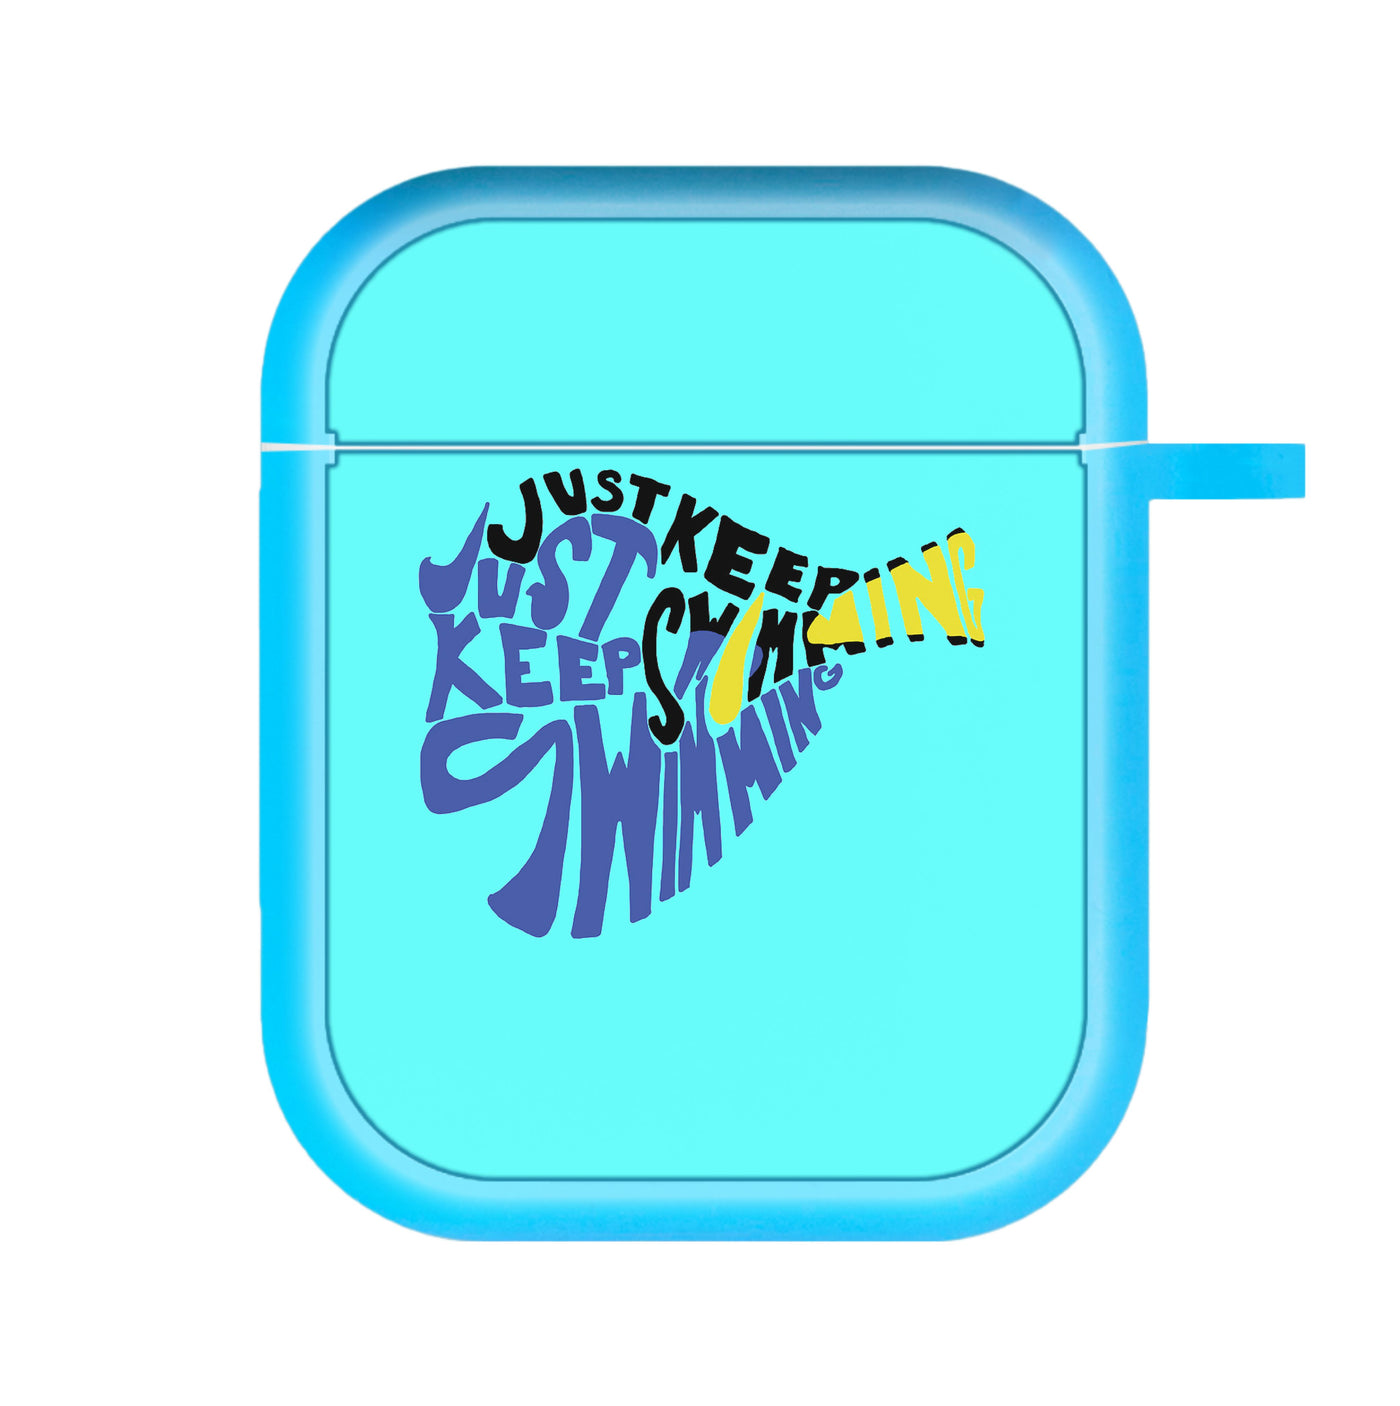 Just Keep Swimming - Finding Dory Disney AirPods Case